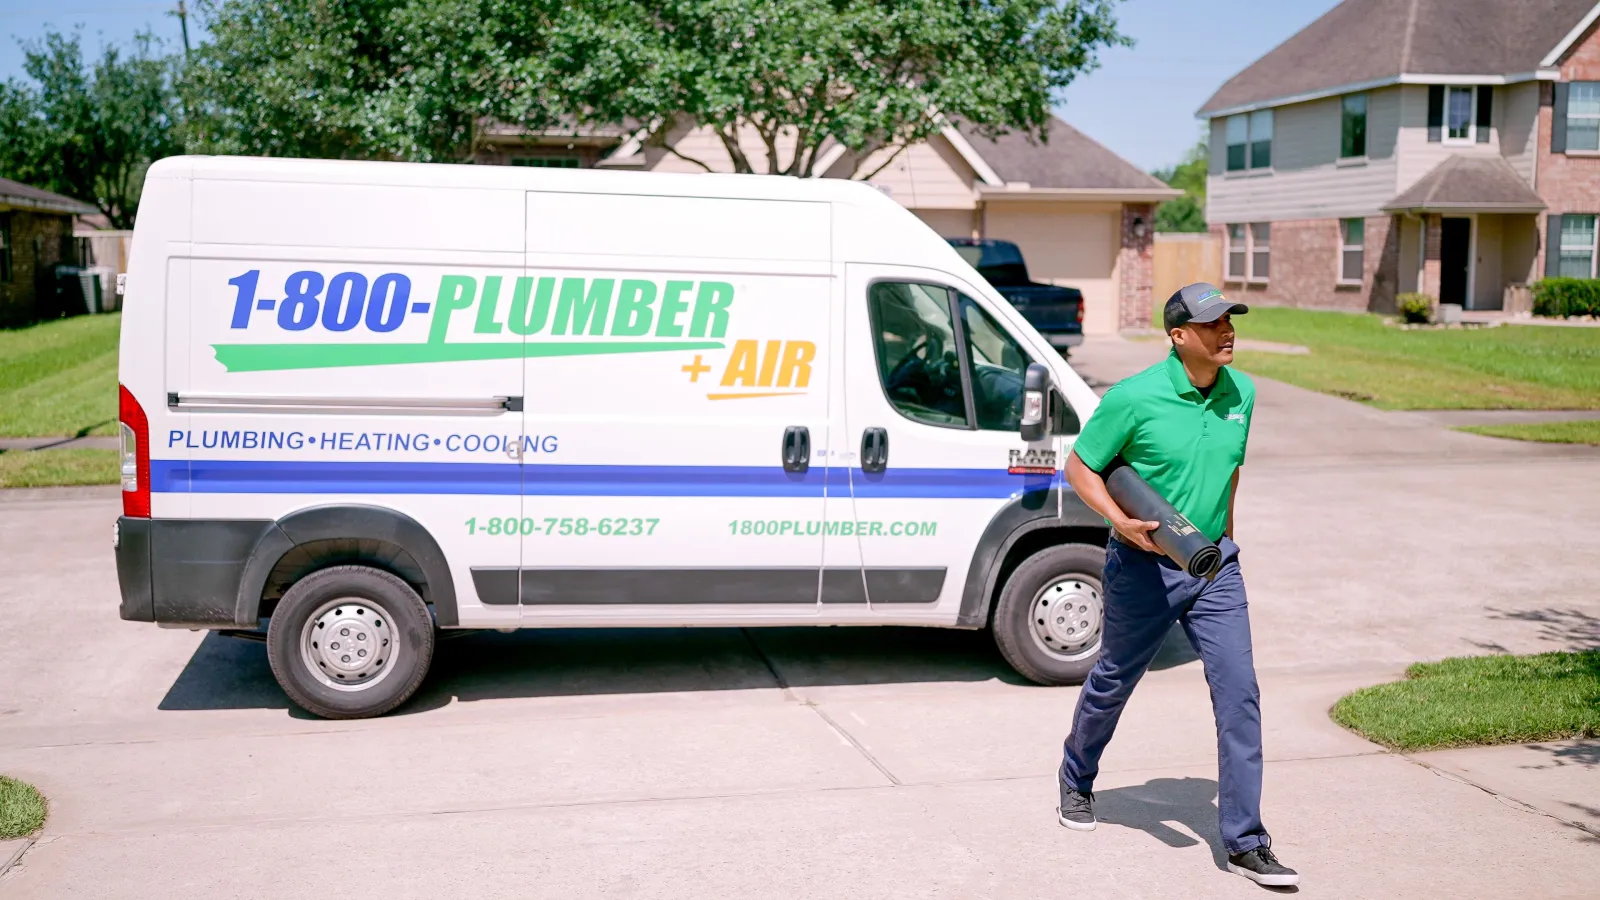 A Greenville plumber arrives in a van to unclog a drain